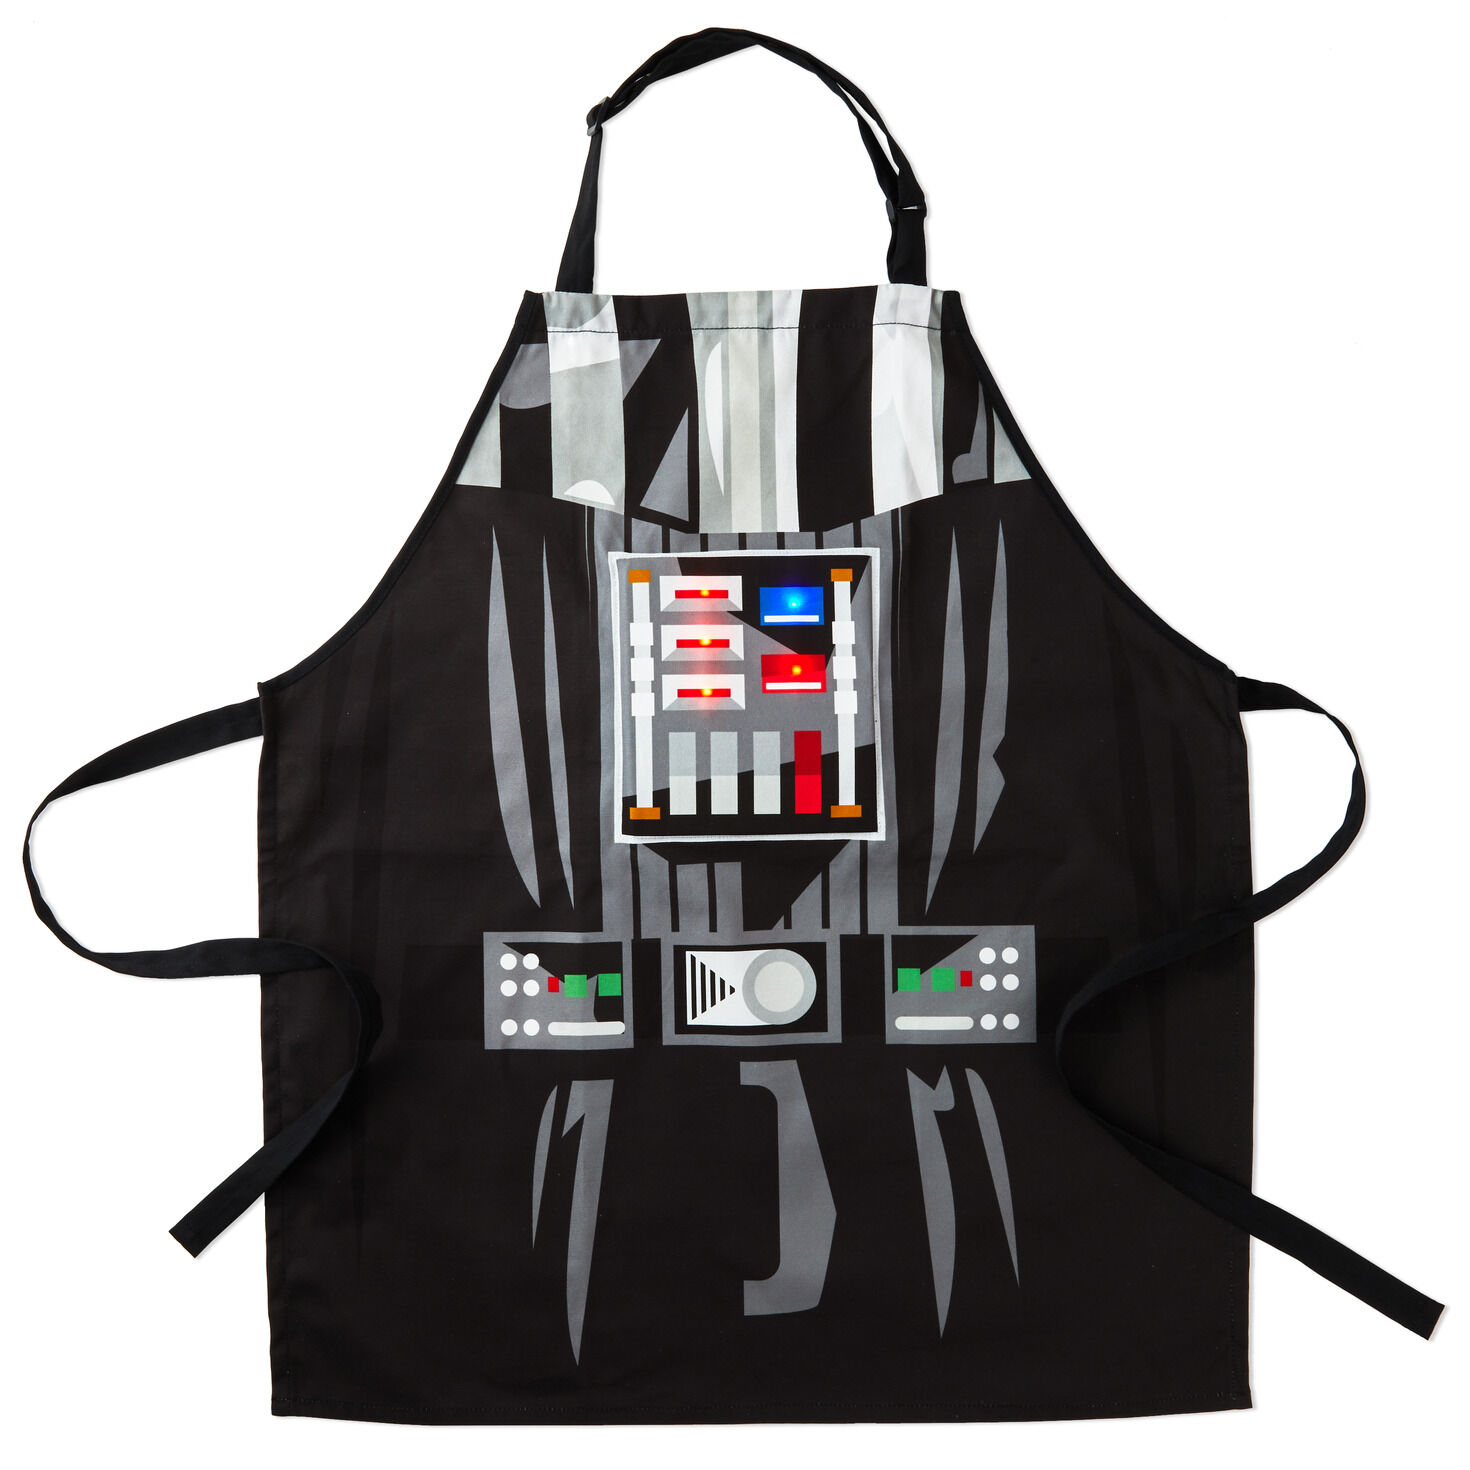 OFFICIAL DISNEY STAR WARS DARTH VADER KITCHEN CHEF APRON NEW IN GIFT TUBE 